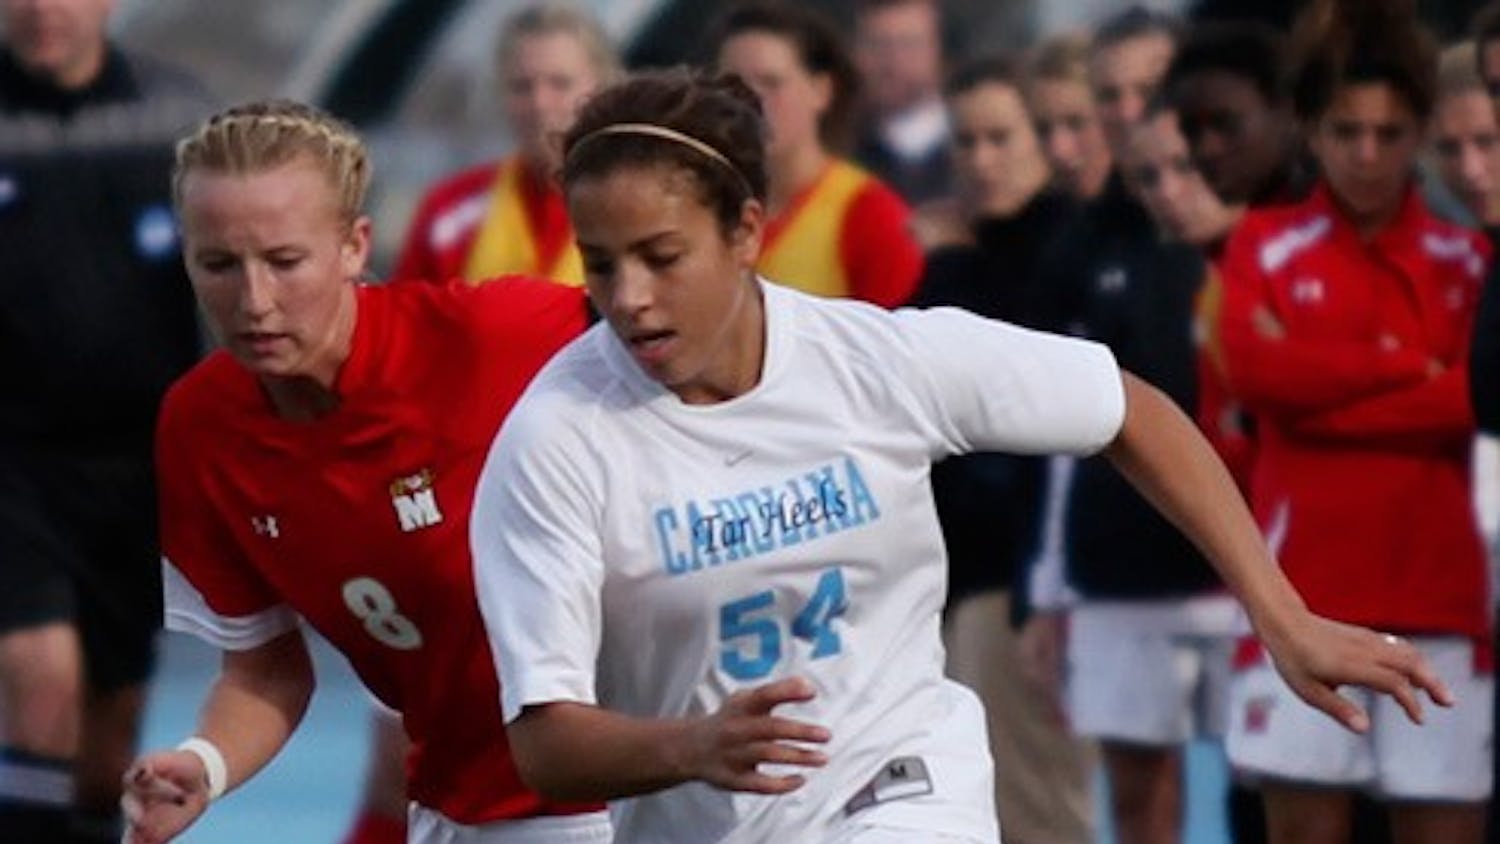 Senior forward Casey Nogueira scored during UNC’s win against Maryland in the NCAA Tournament. DTH/Will Cooper